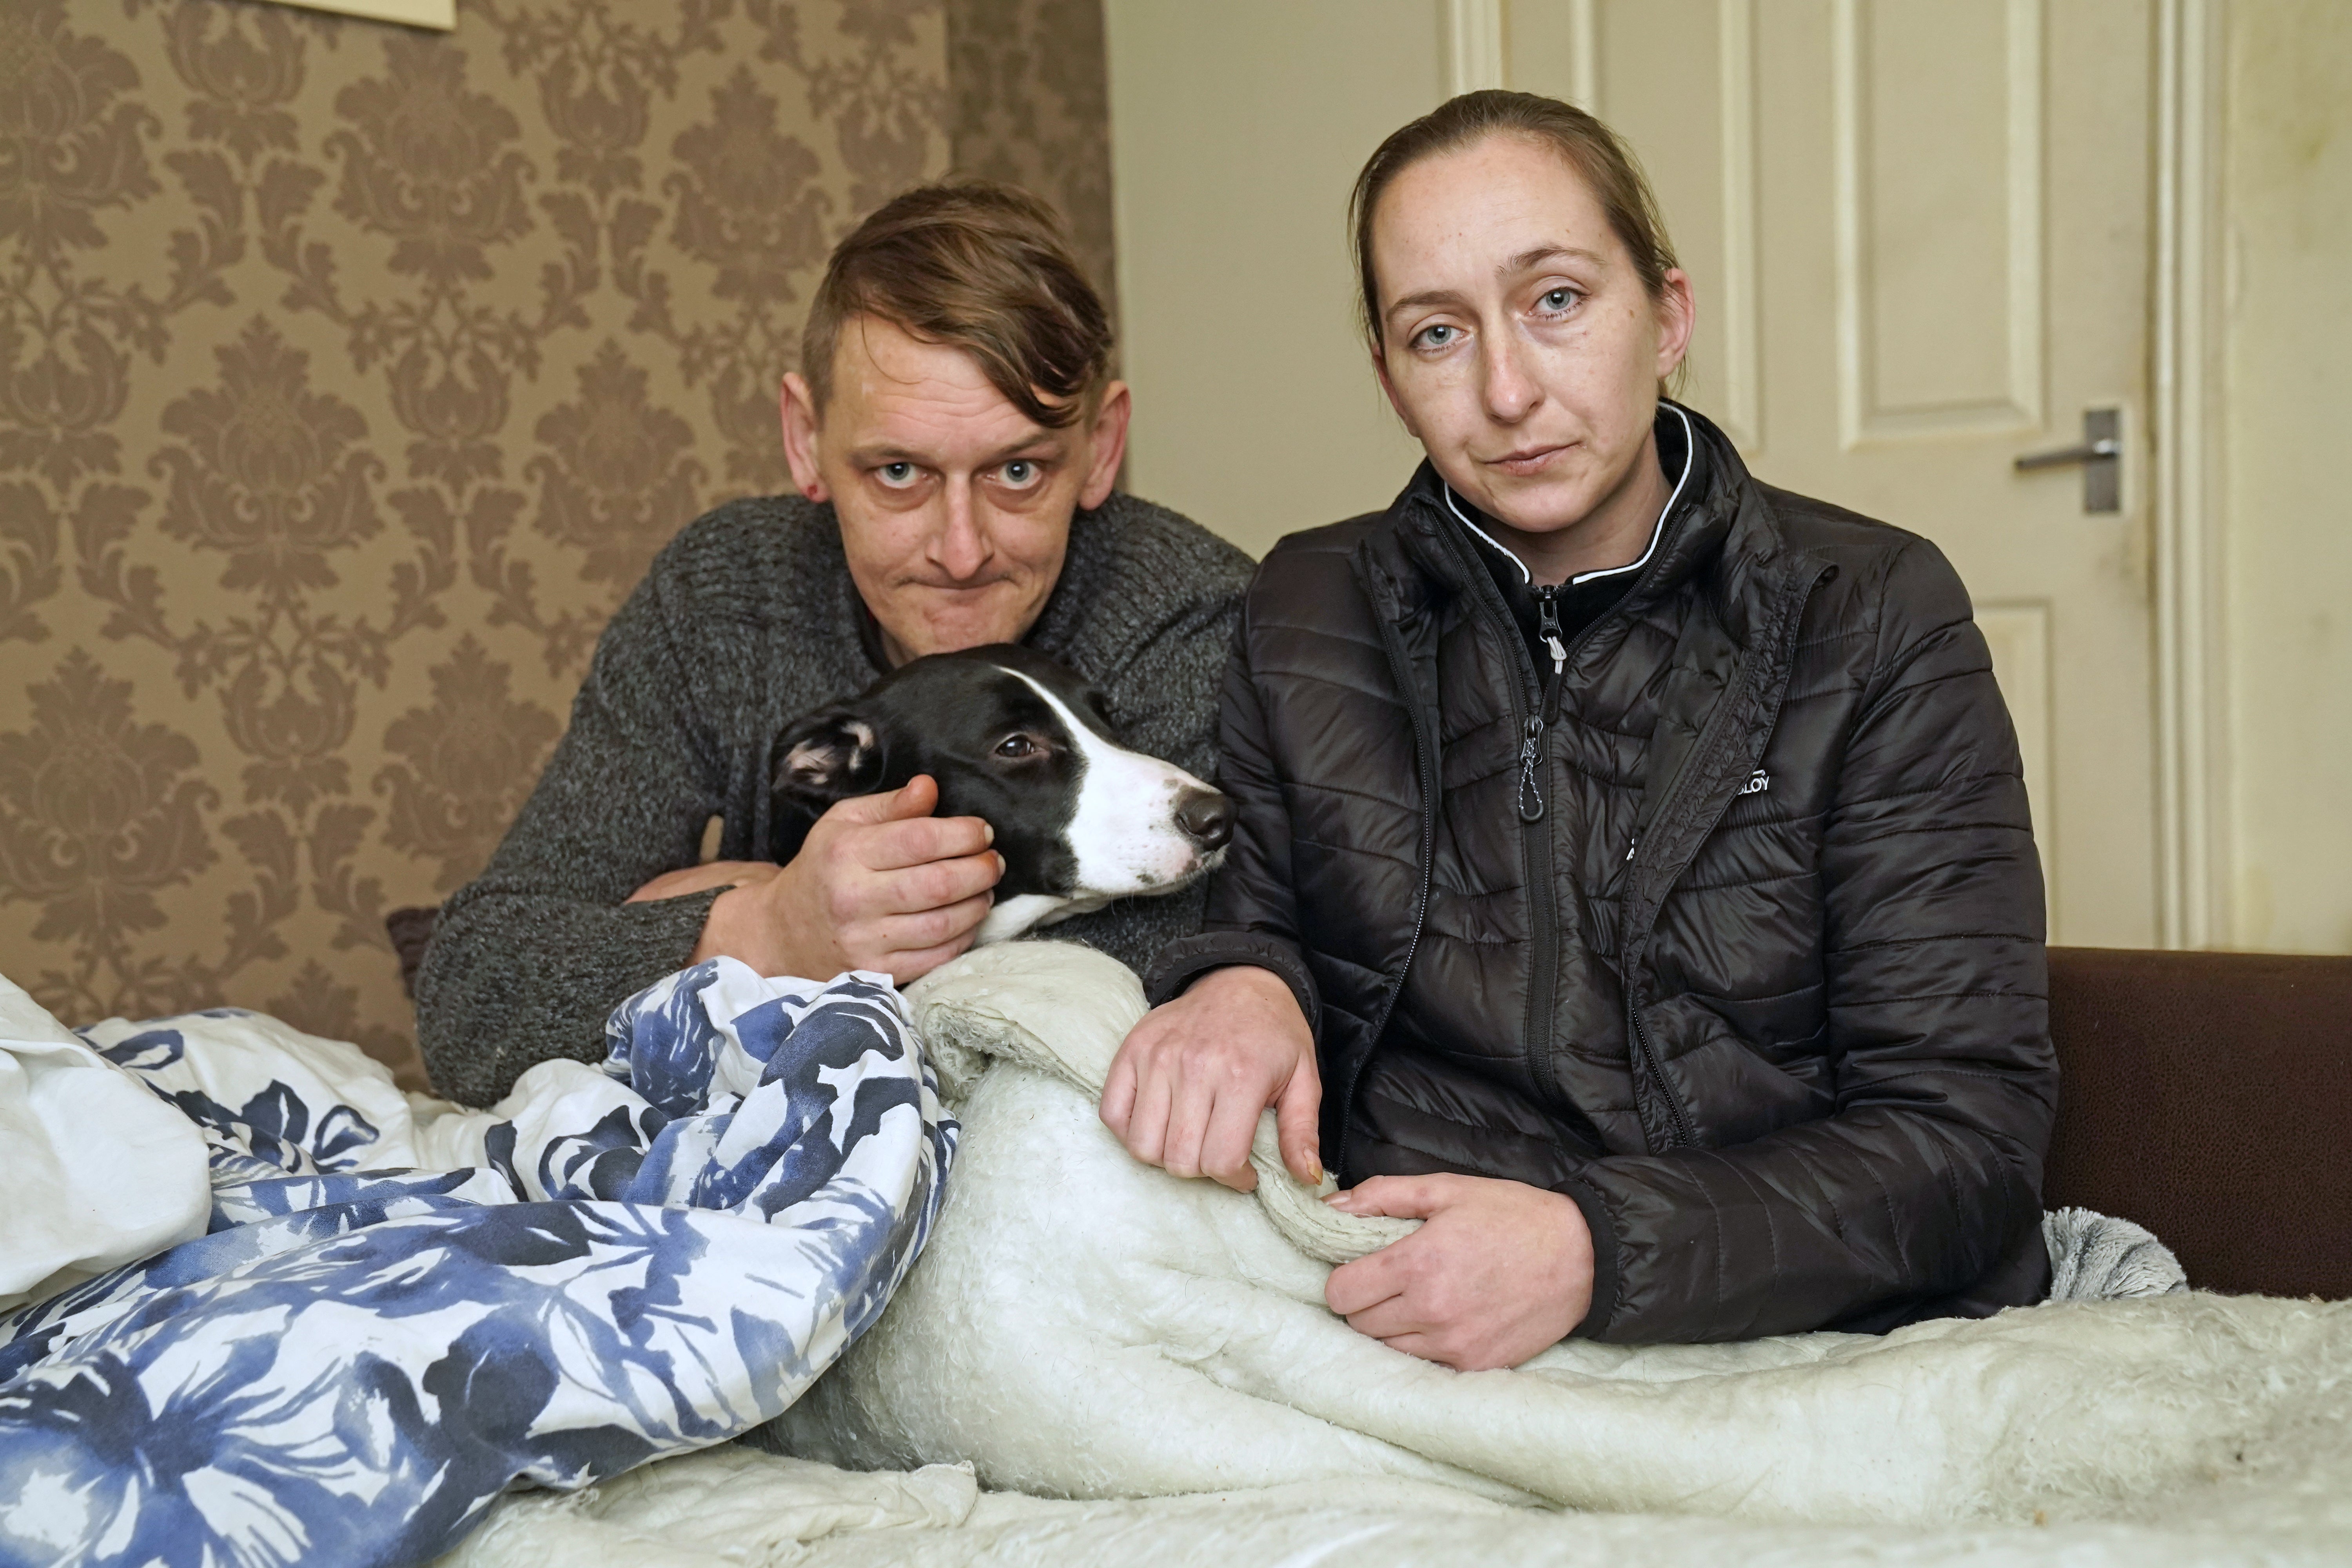 Christopher Bertram and his partner Jessica Teasdale at their home in Stanley, County Durham (Danny Lawson/PA)